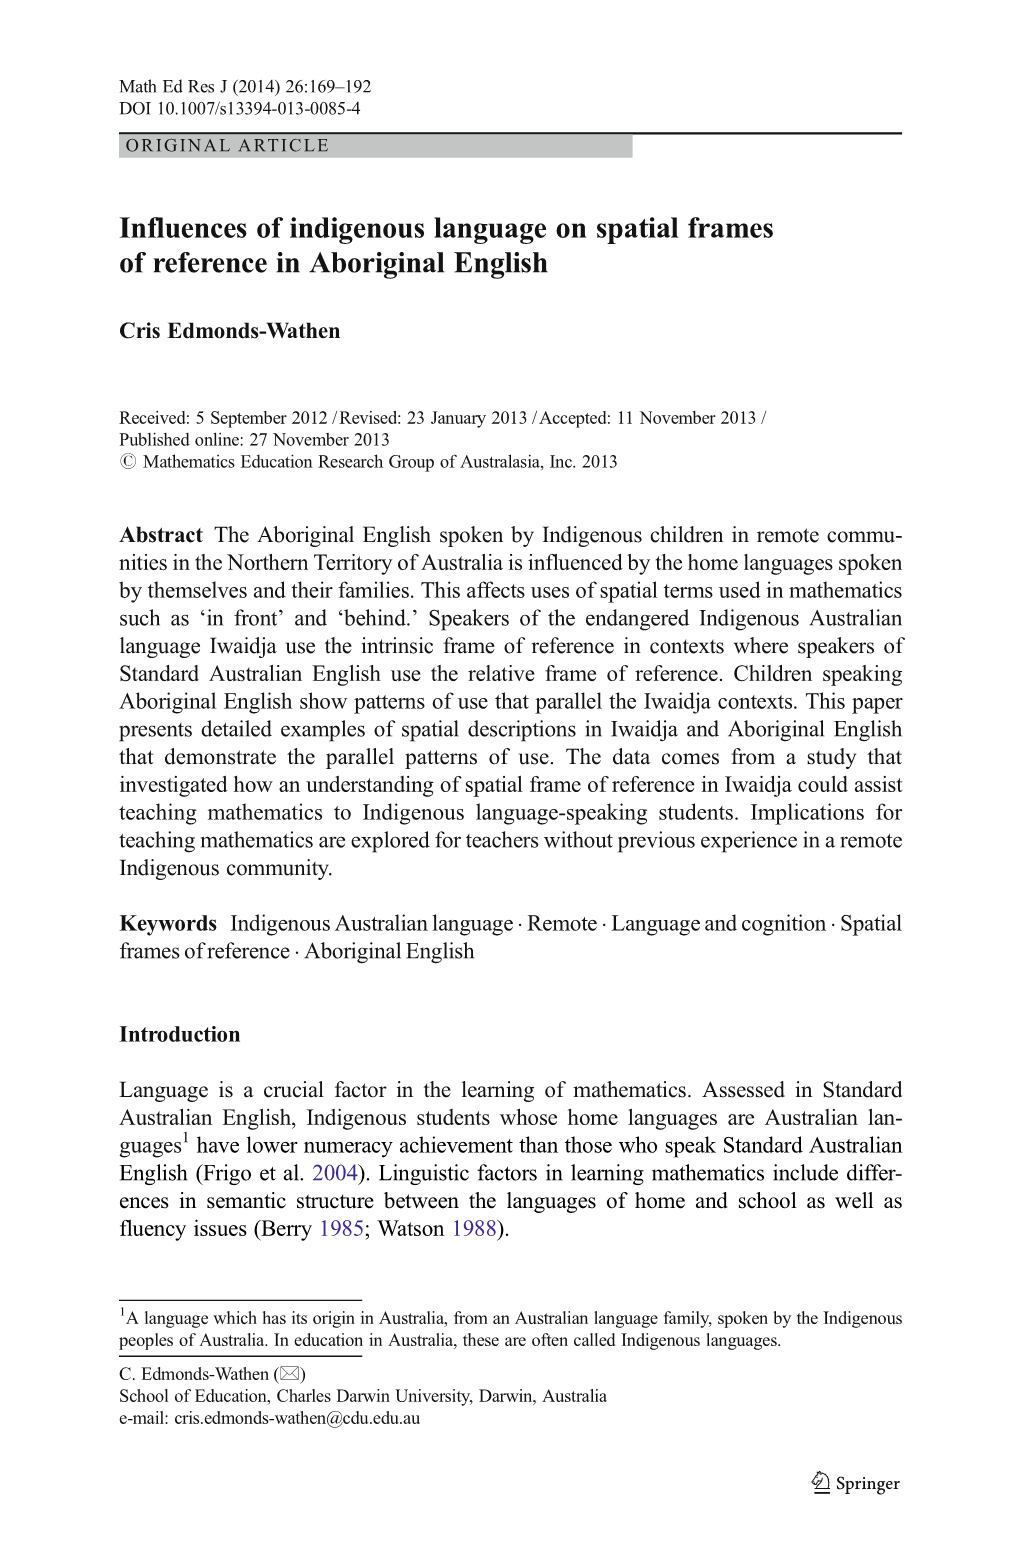 Influences of Indigenous Language on Spatial Frames of Reference in Aboriginal English